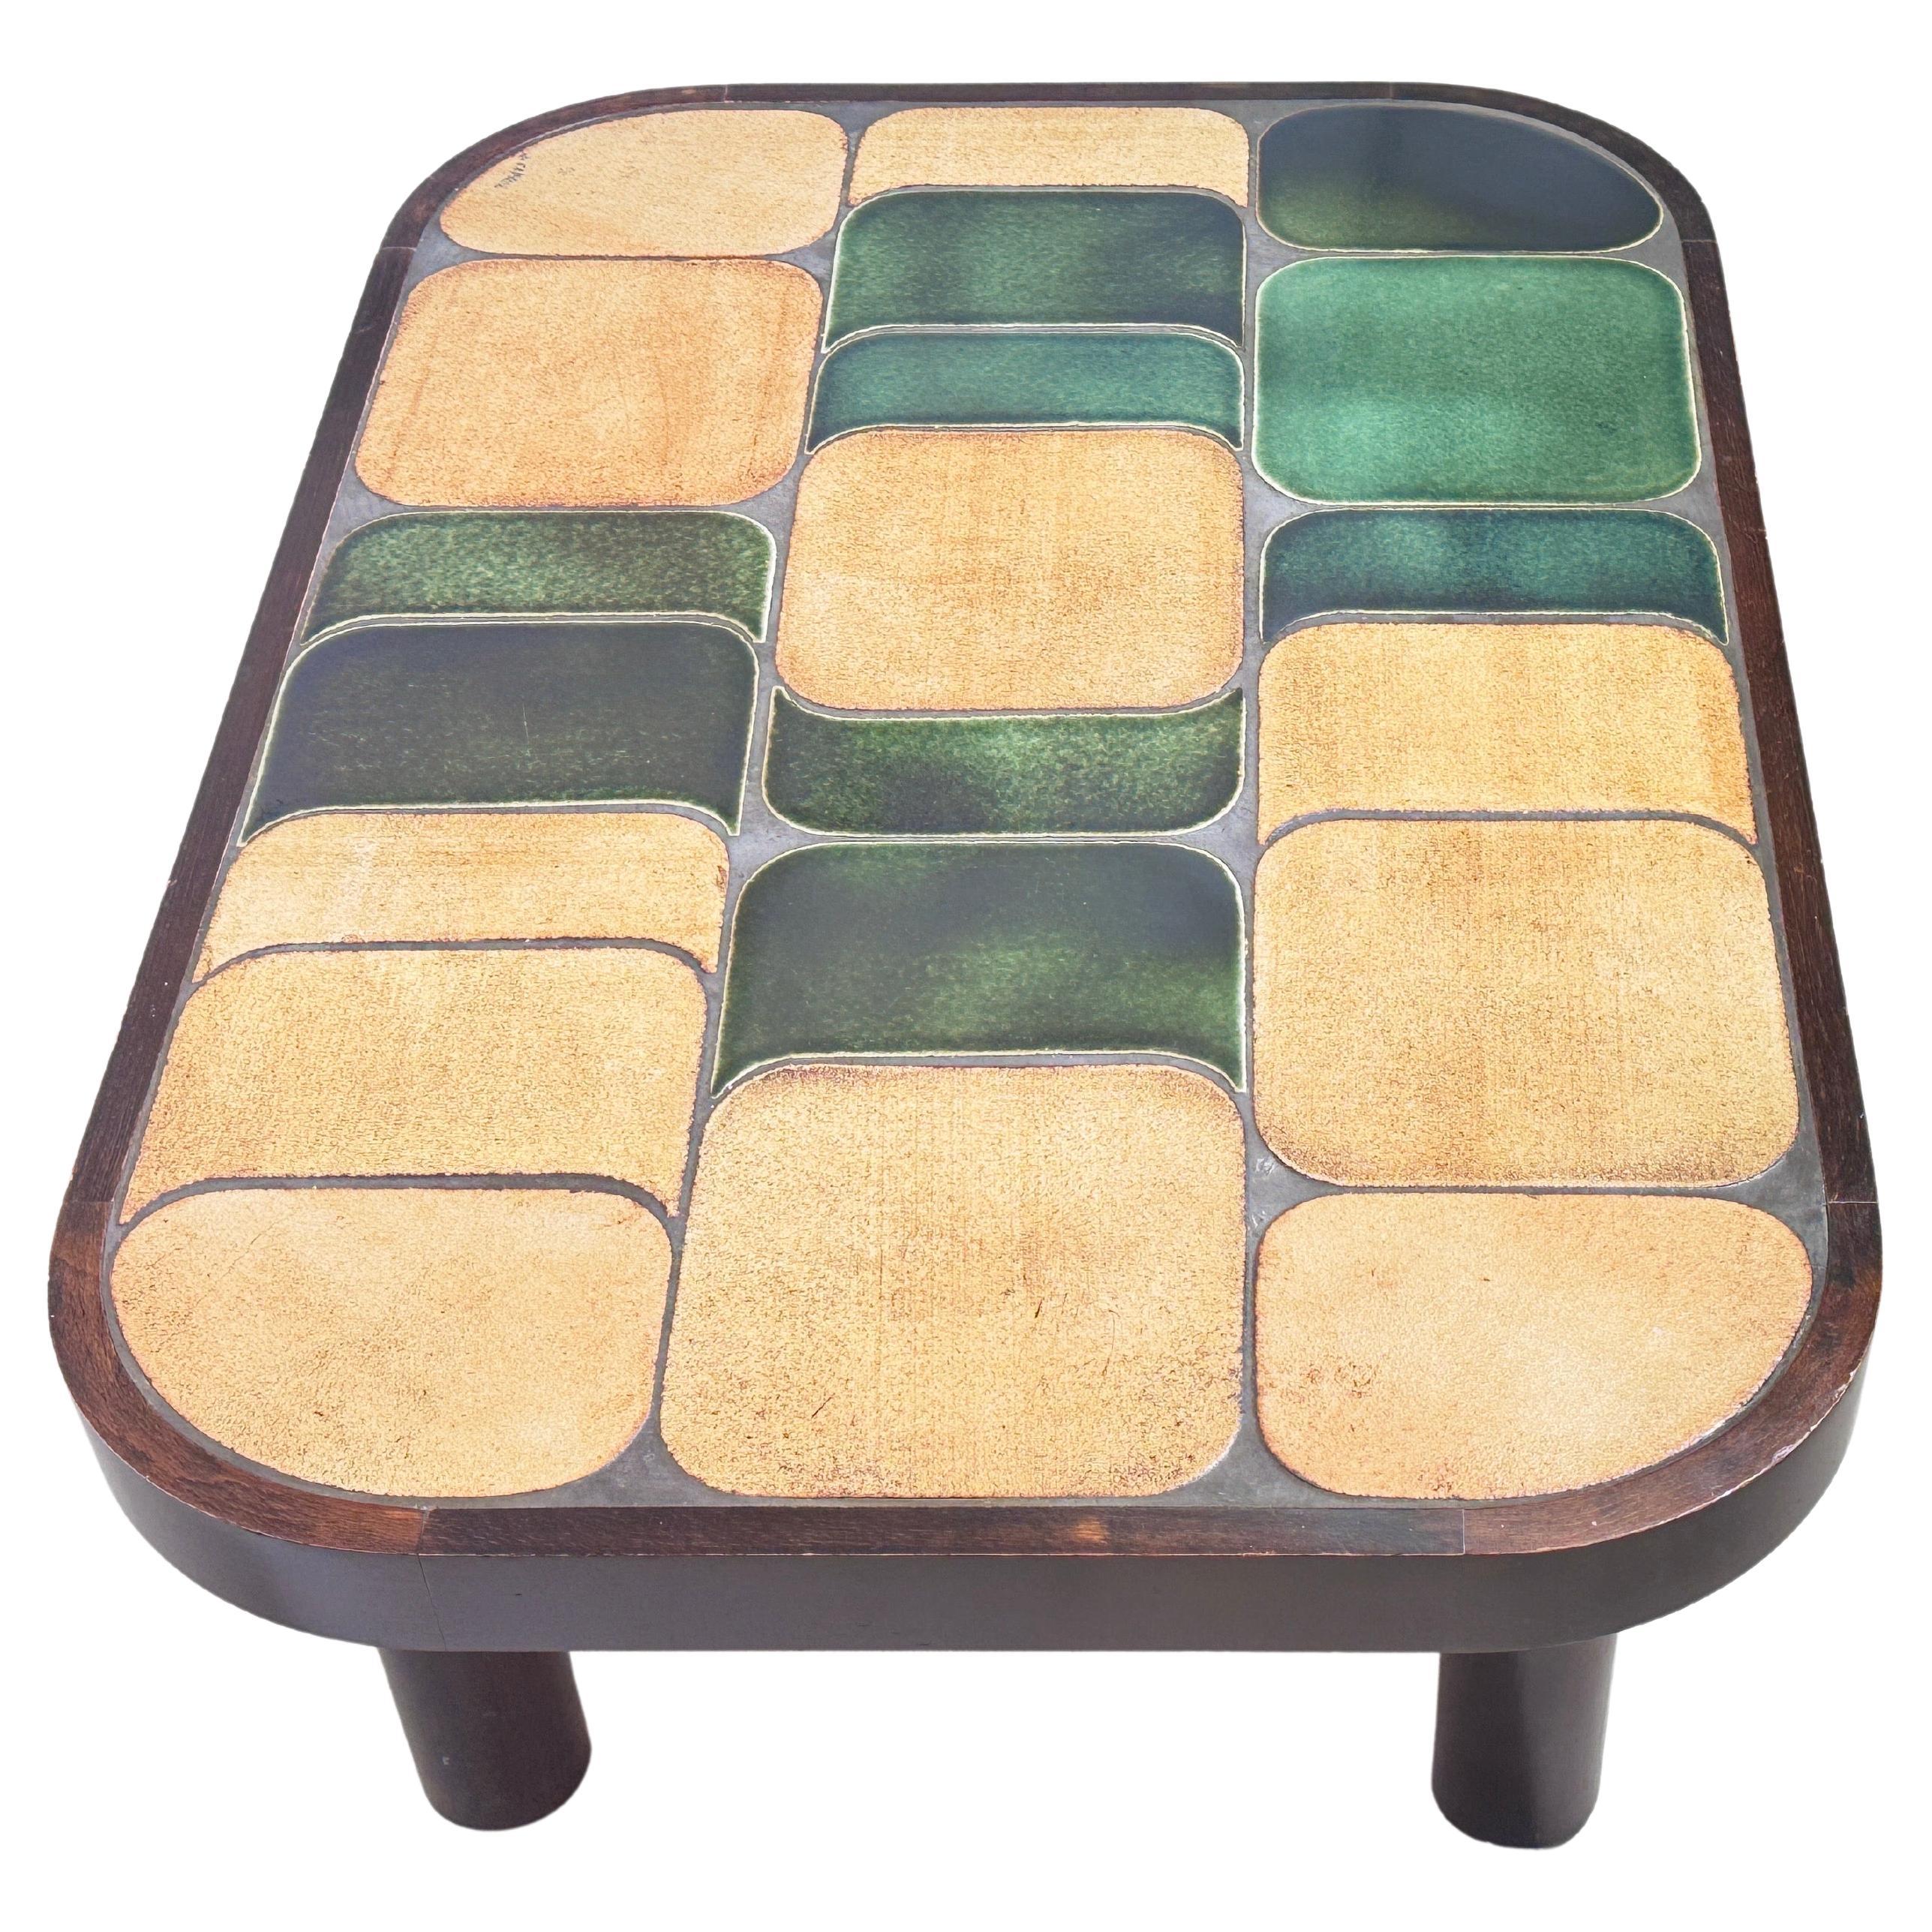 Roger Capron ‘Shogun’ Coffee Table in Ceramic France 1970 Brown and Green Color 